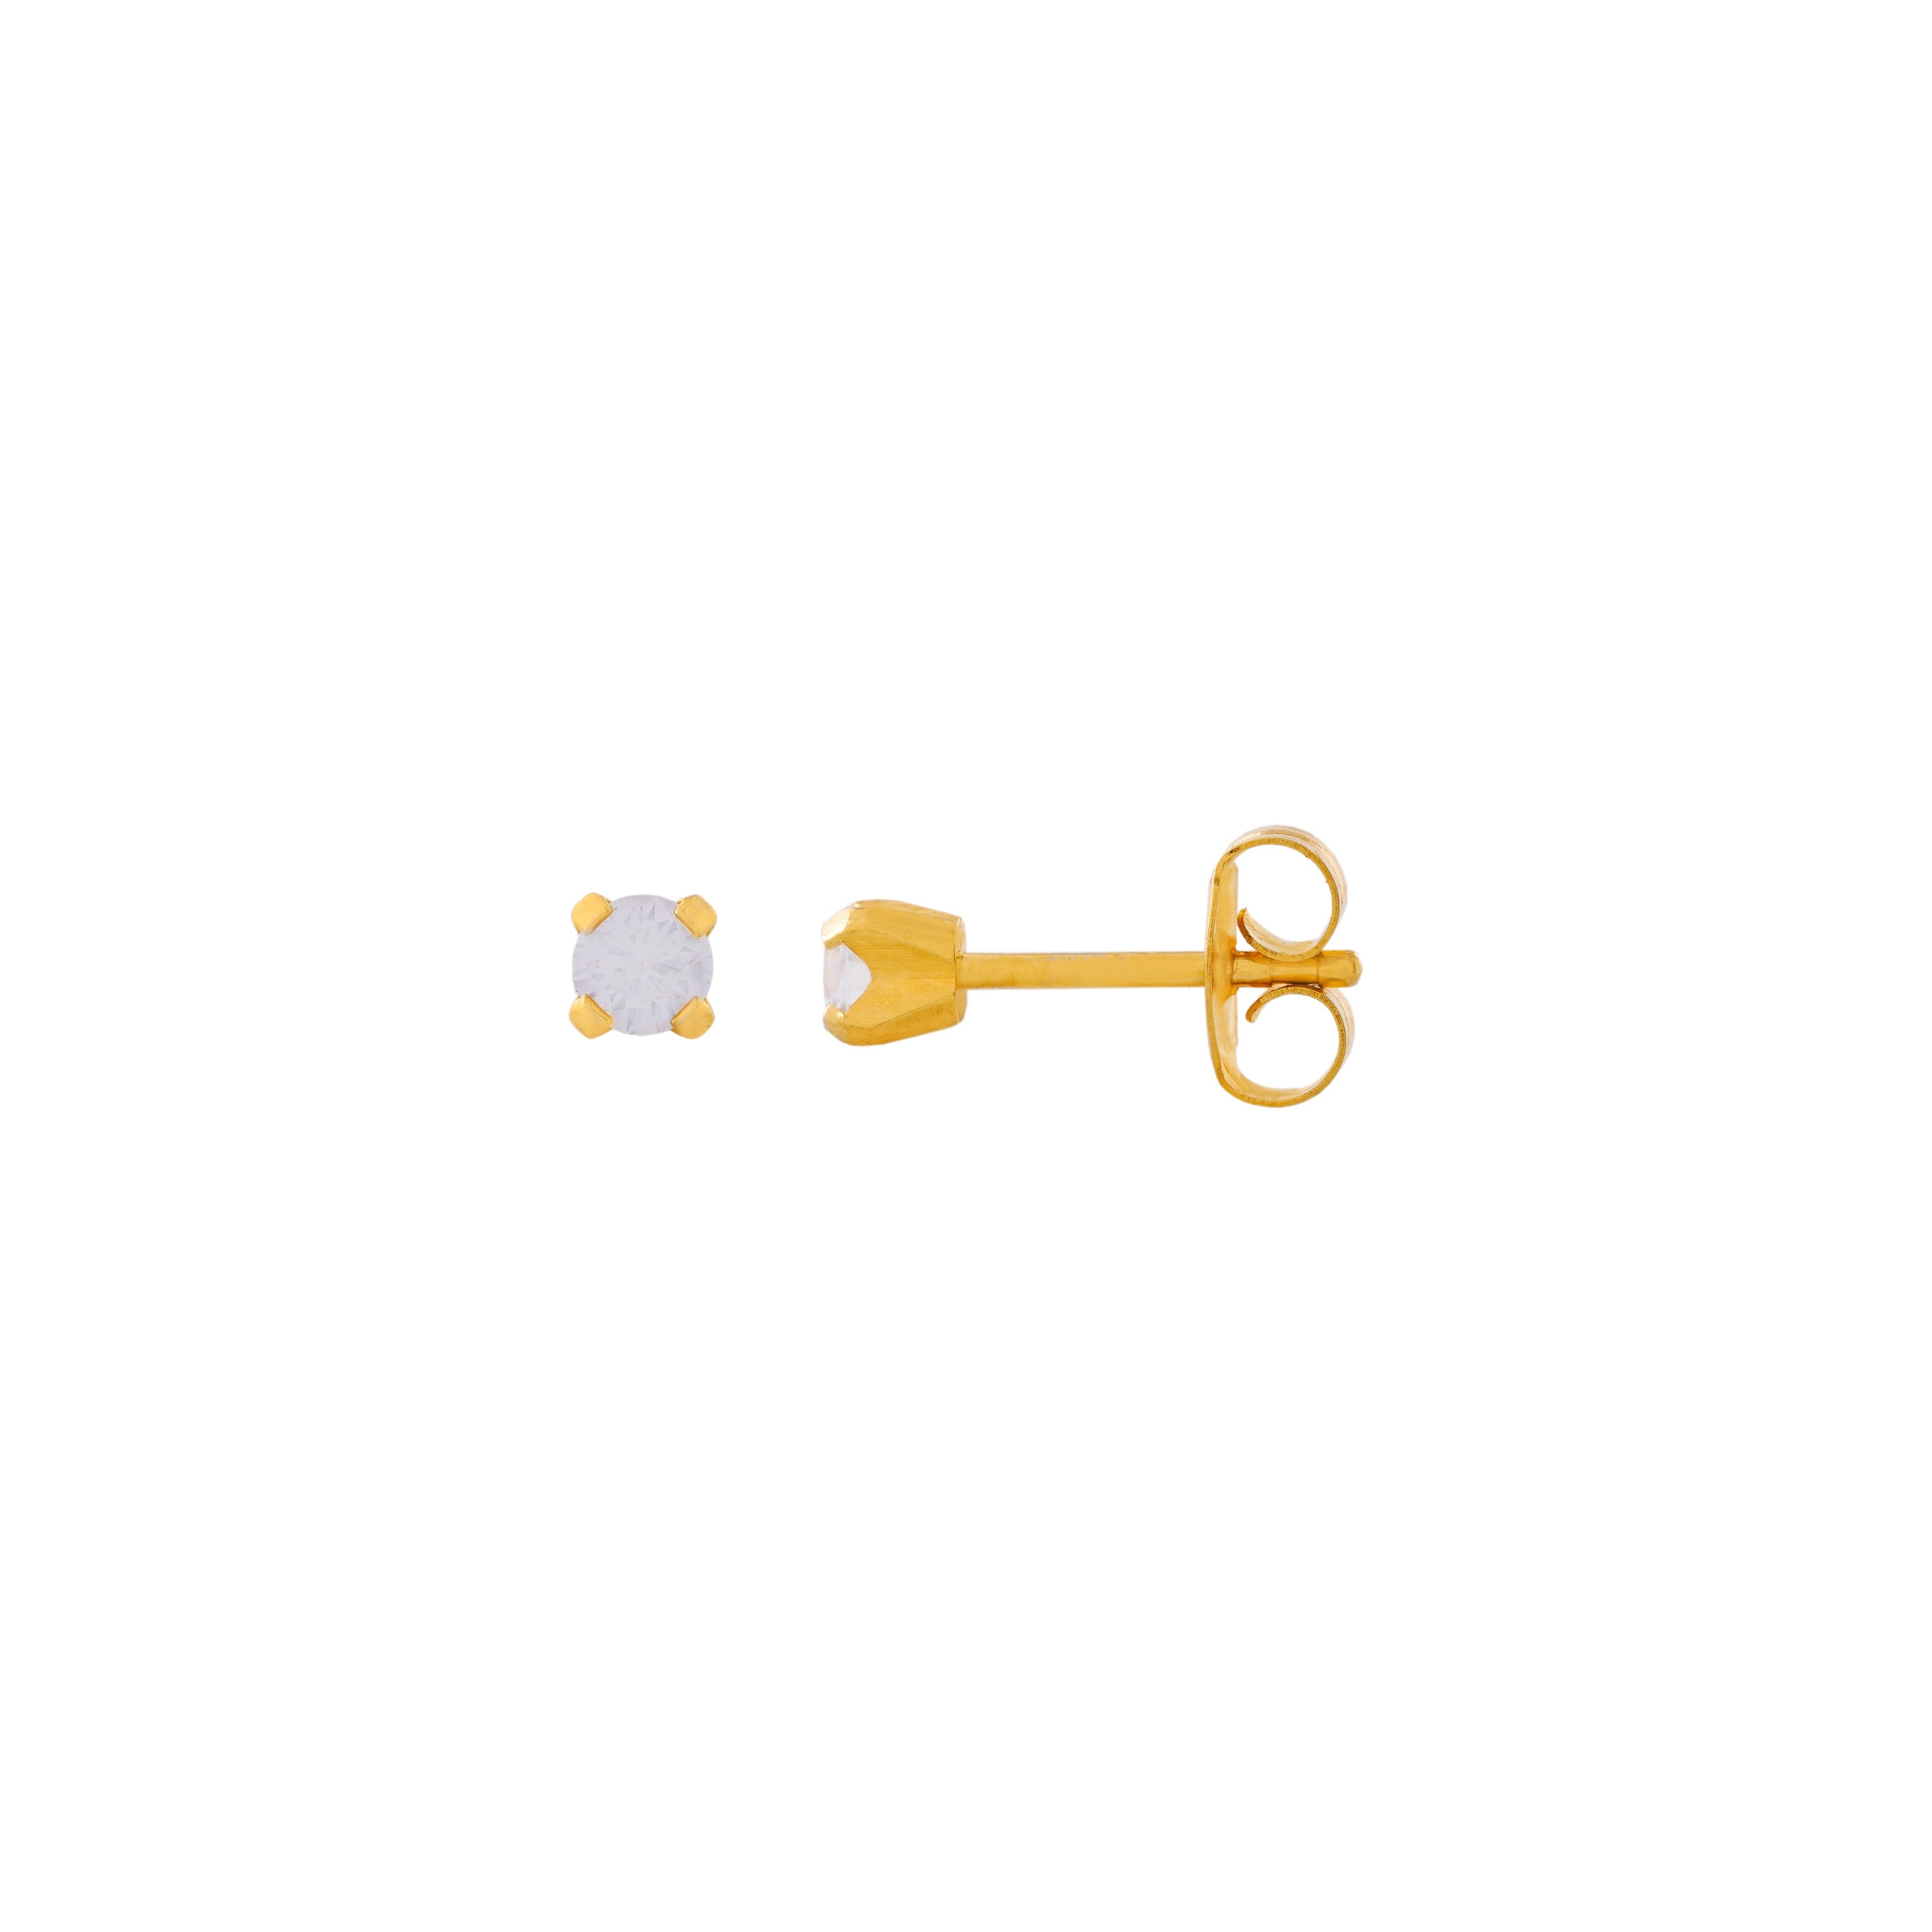 3MM Cubic Zirconia 24K Pure Gold Plated Ear Studs | MADE IN USA | Ideal for everyday wear